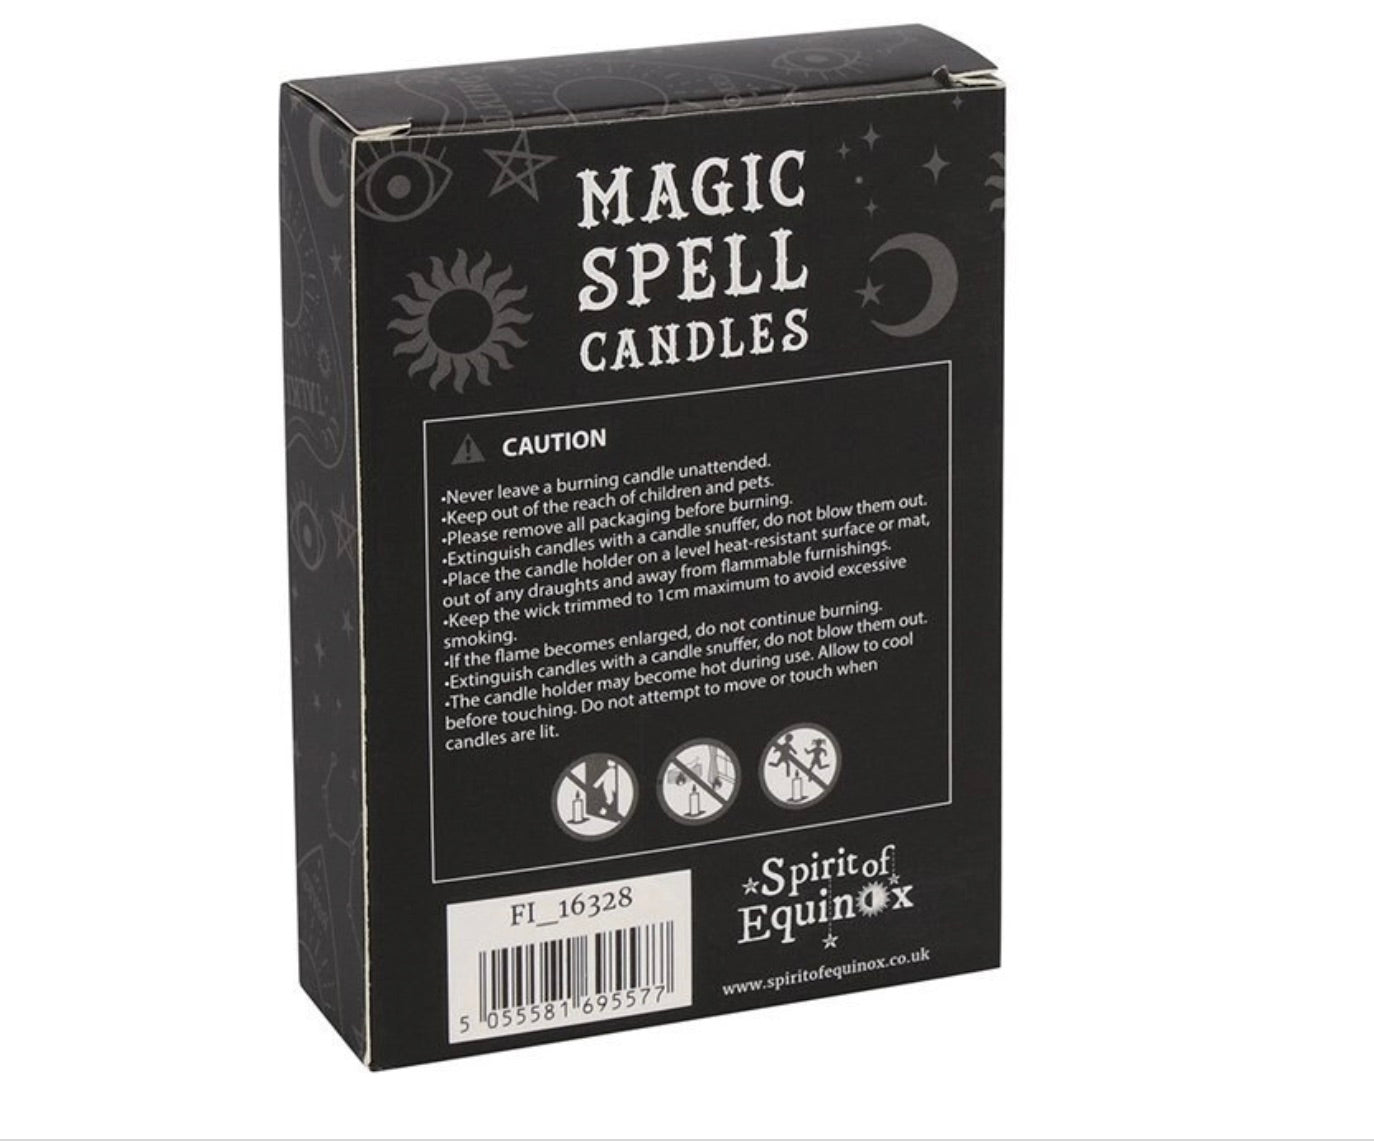 12 Mixed Spell Candles